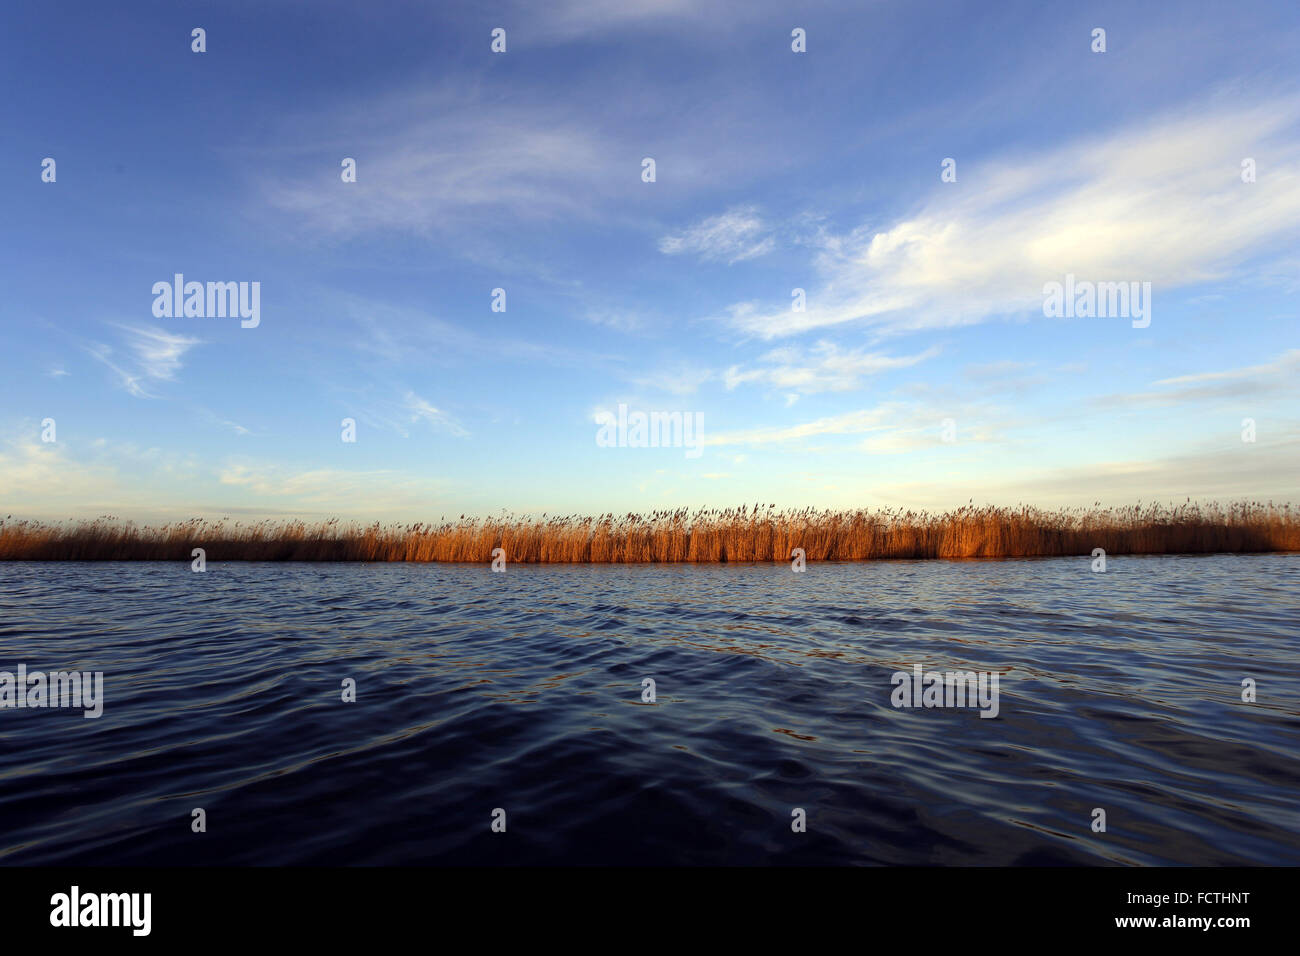 Norfolk Broads: Reeds lining the bank of the River Thurne near Martham, Norfolk, Stock Photo